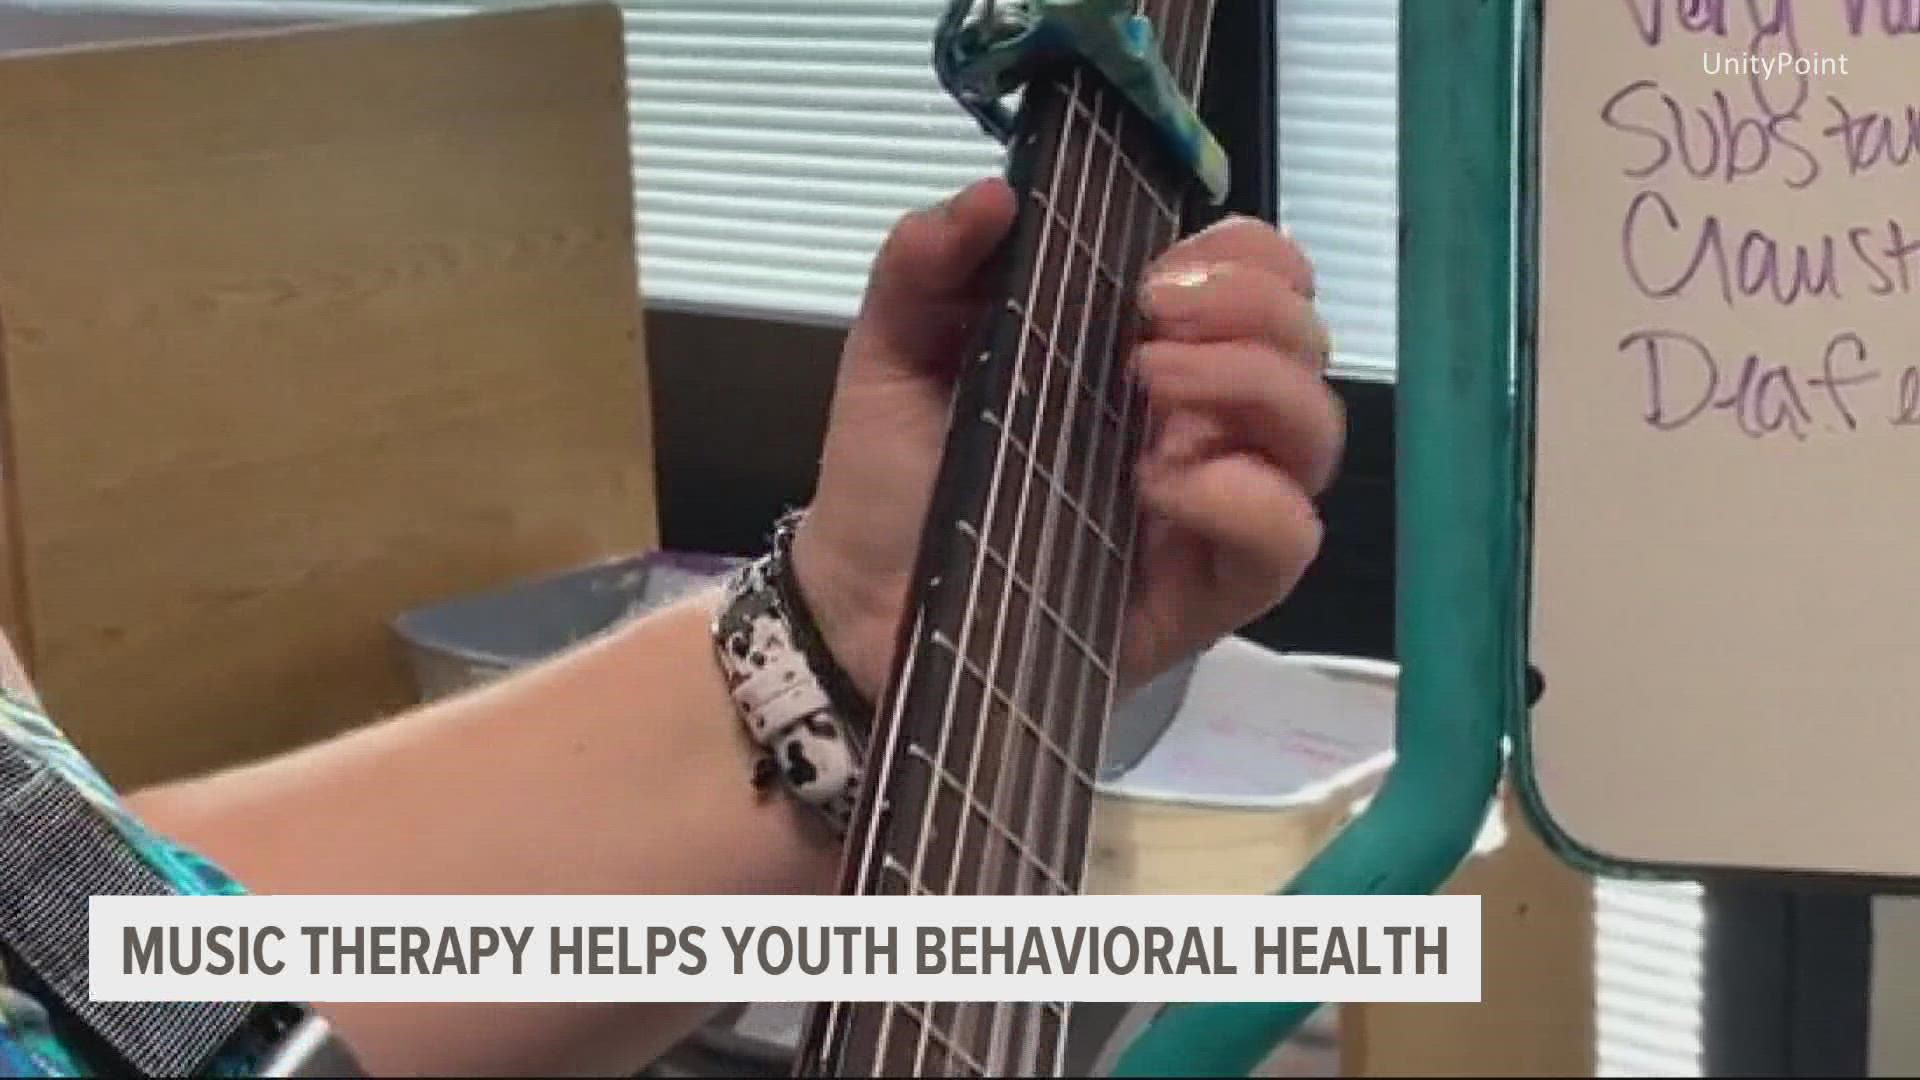 A certified music therapist uses music to help patients of all ages with their behavioral and mental health.